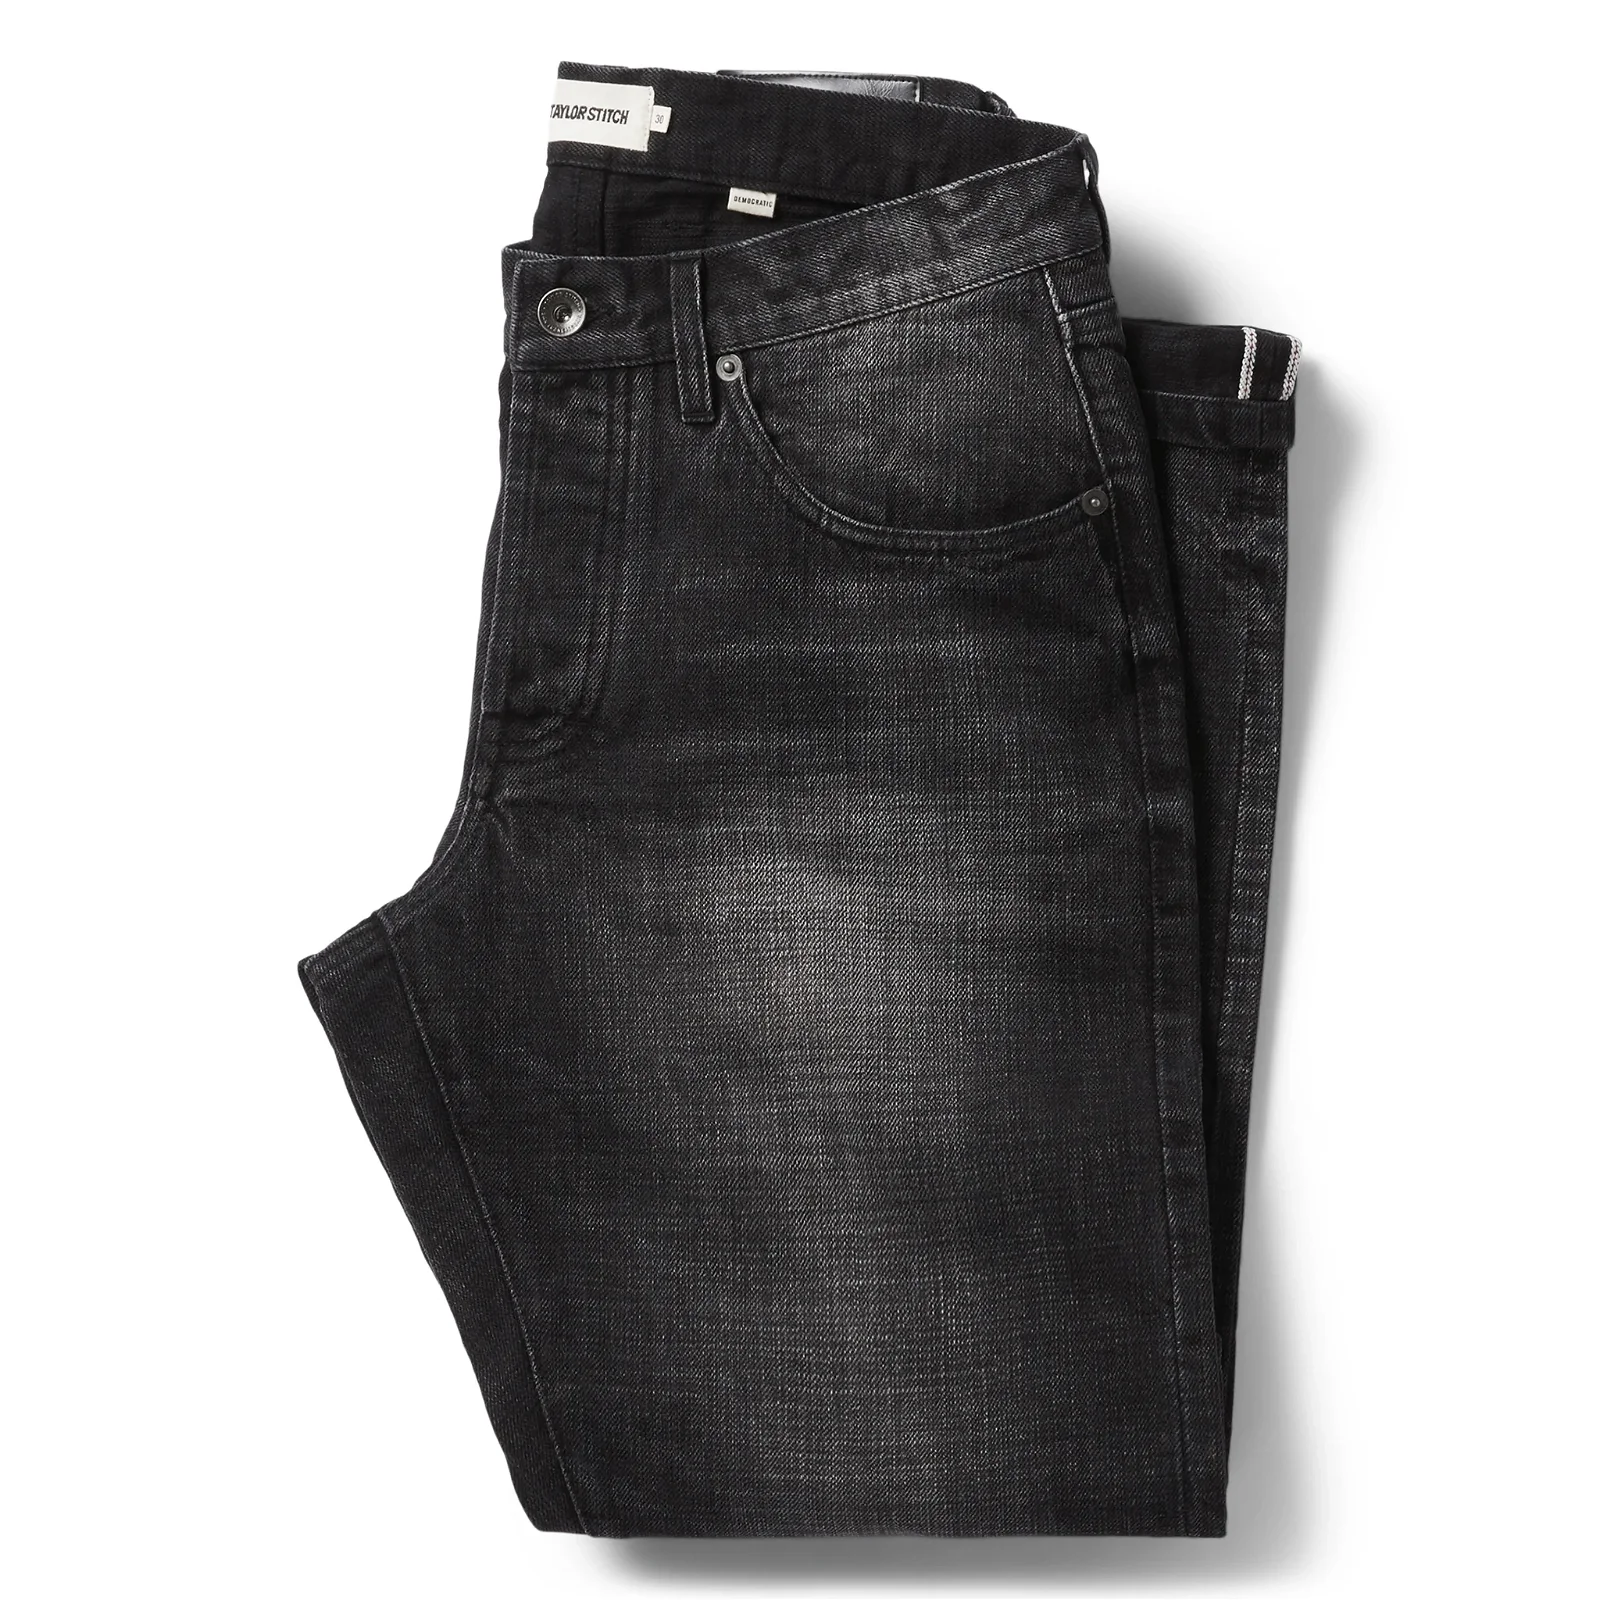 Image of The Democratic Jean in Black 3-Month Wash Selvage